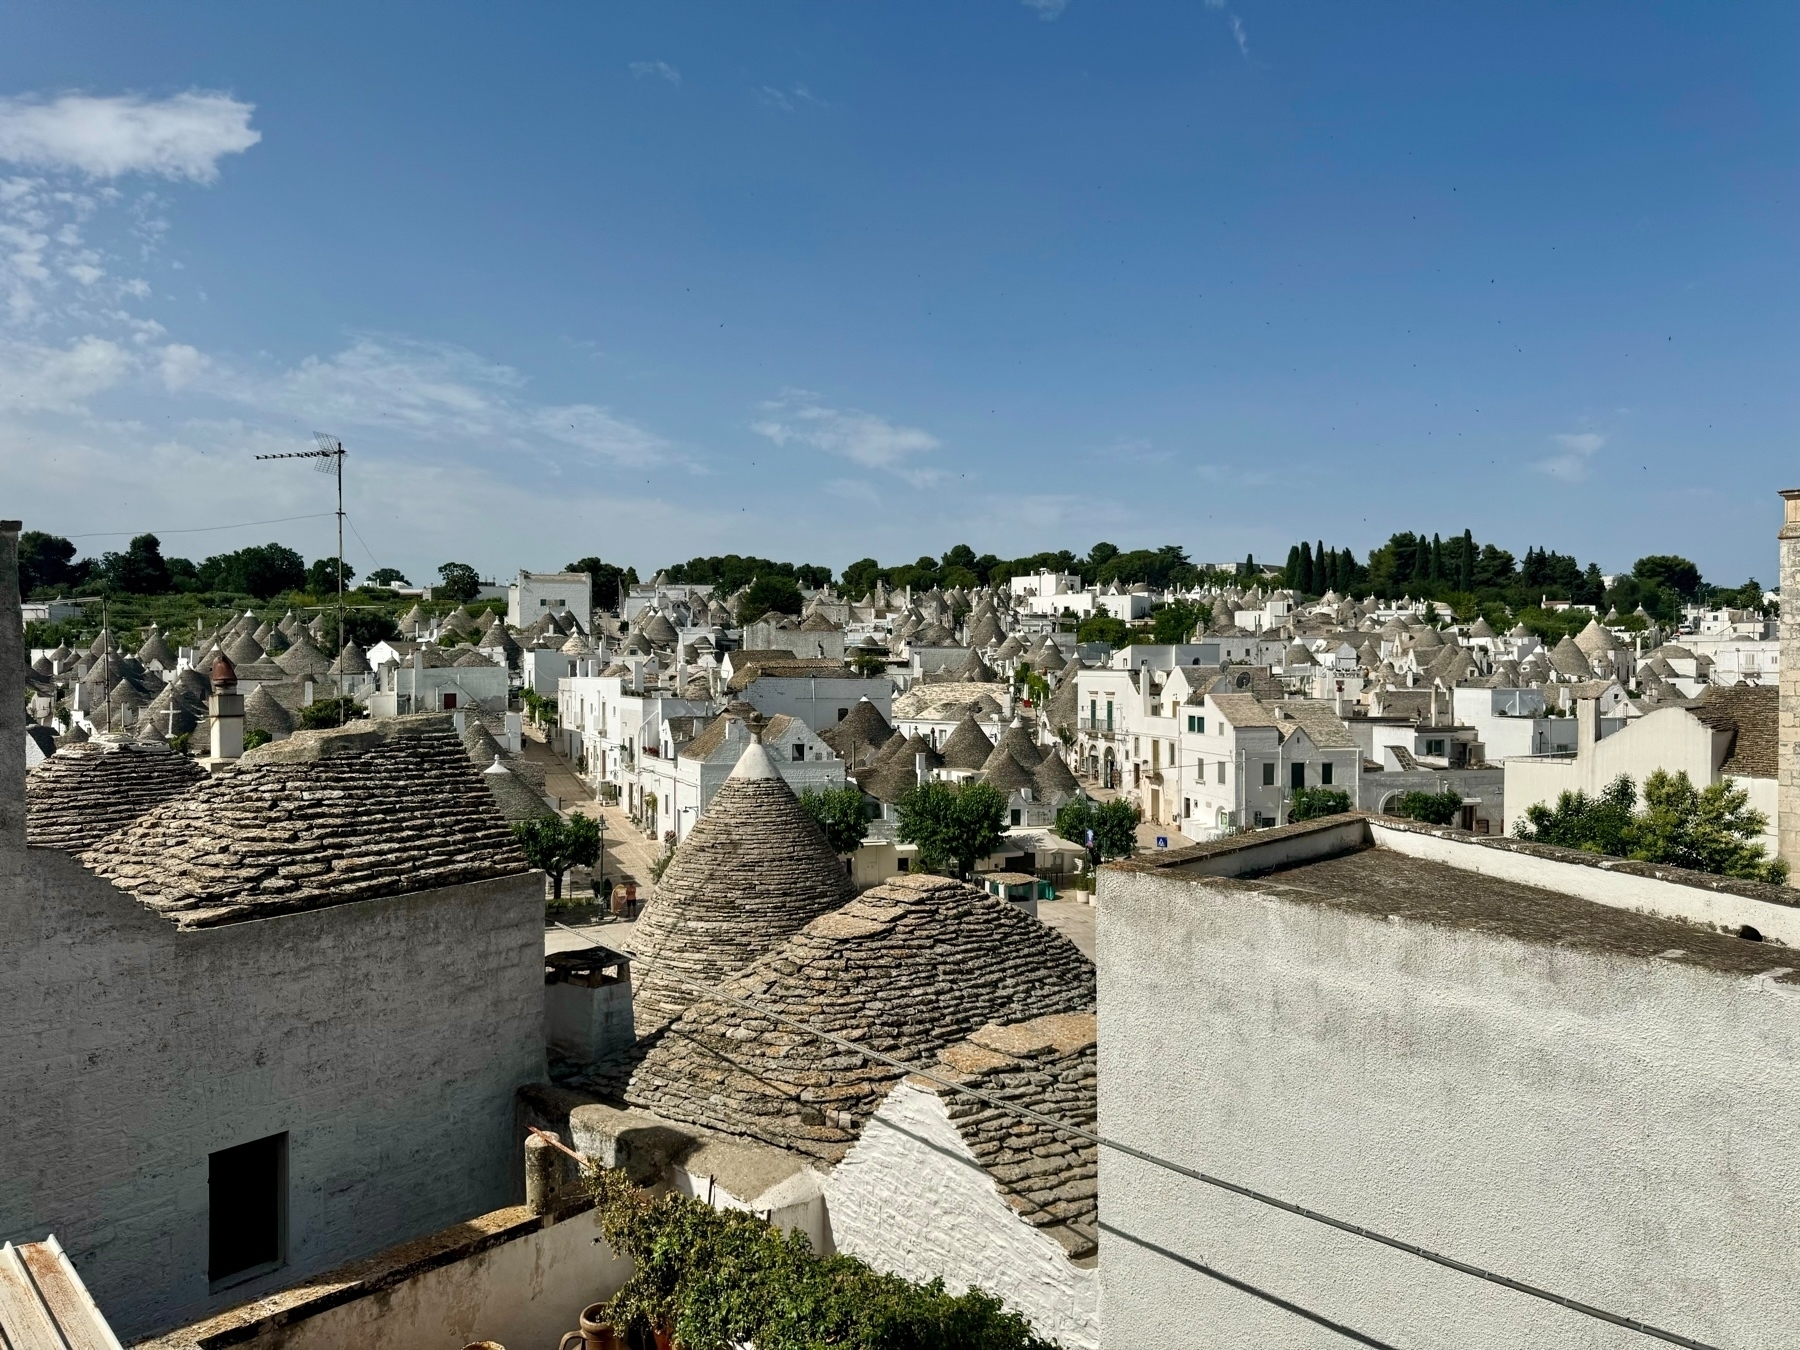 A scenic view of the traditional trulli houses in Alberobello, Italy. The image captures numerous whitewashed stone buildings with distinctive conical roofs under a clear blue sky, with some greenery visible in the background.